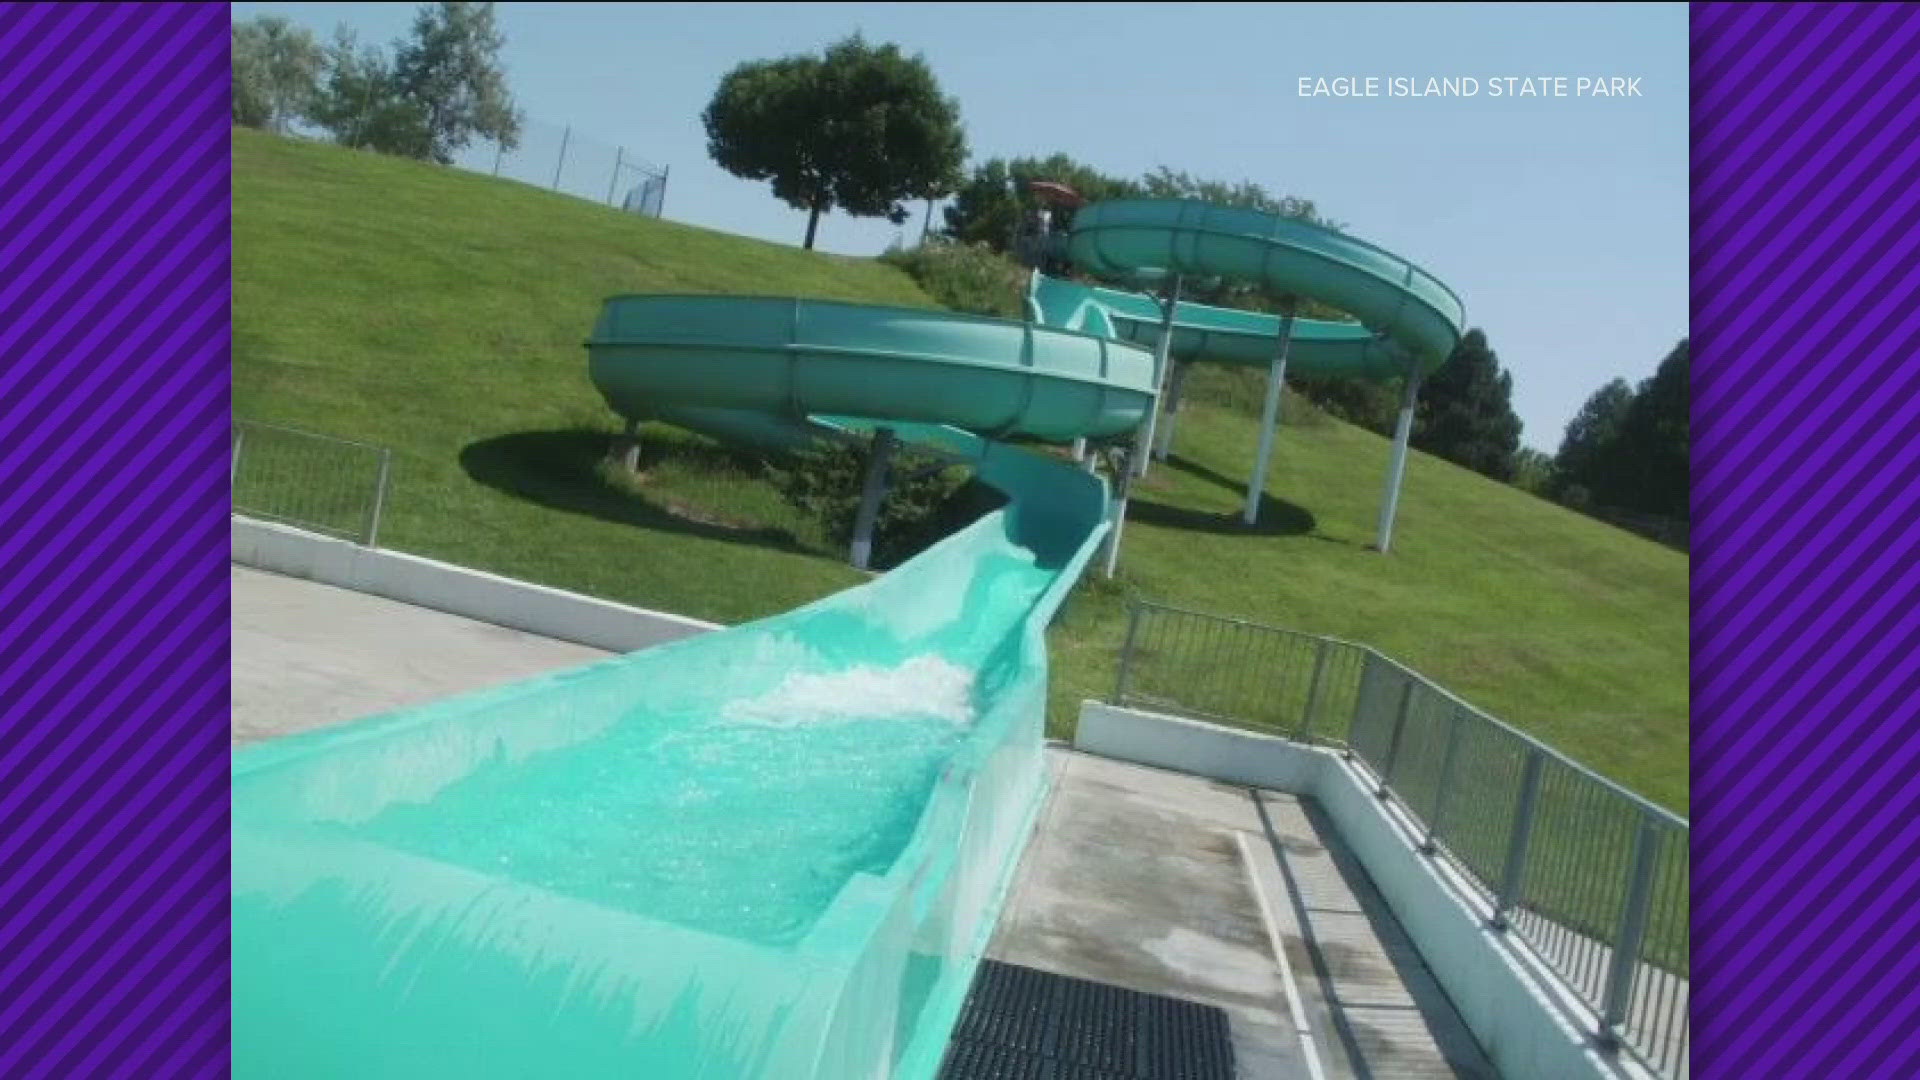 After standing for 40 years, Boise Parks and Rec decided to remove the water slide because it was too expensive to fix.